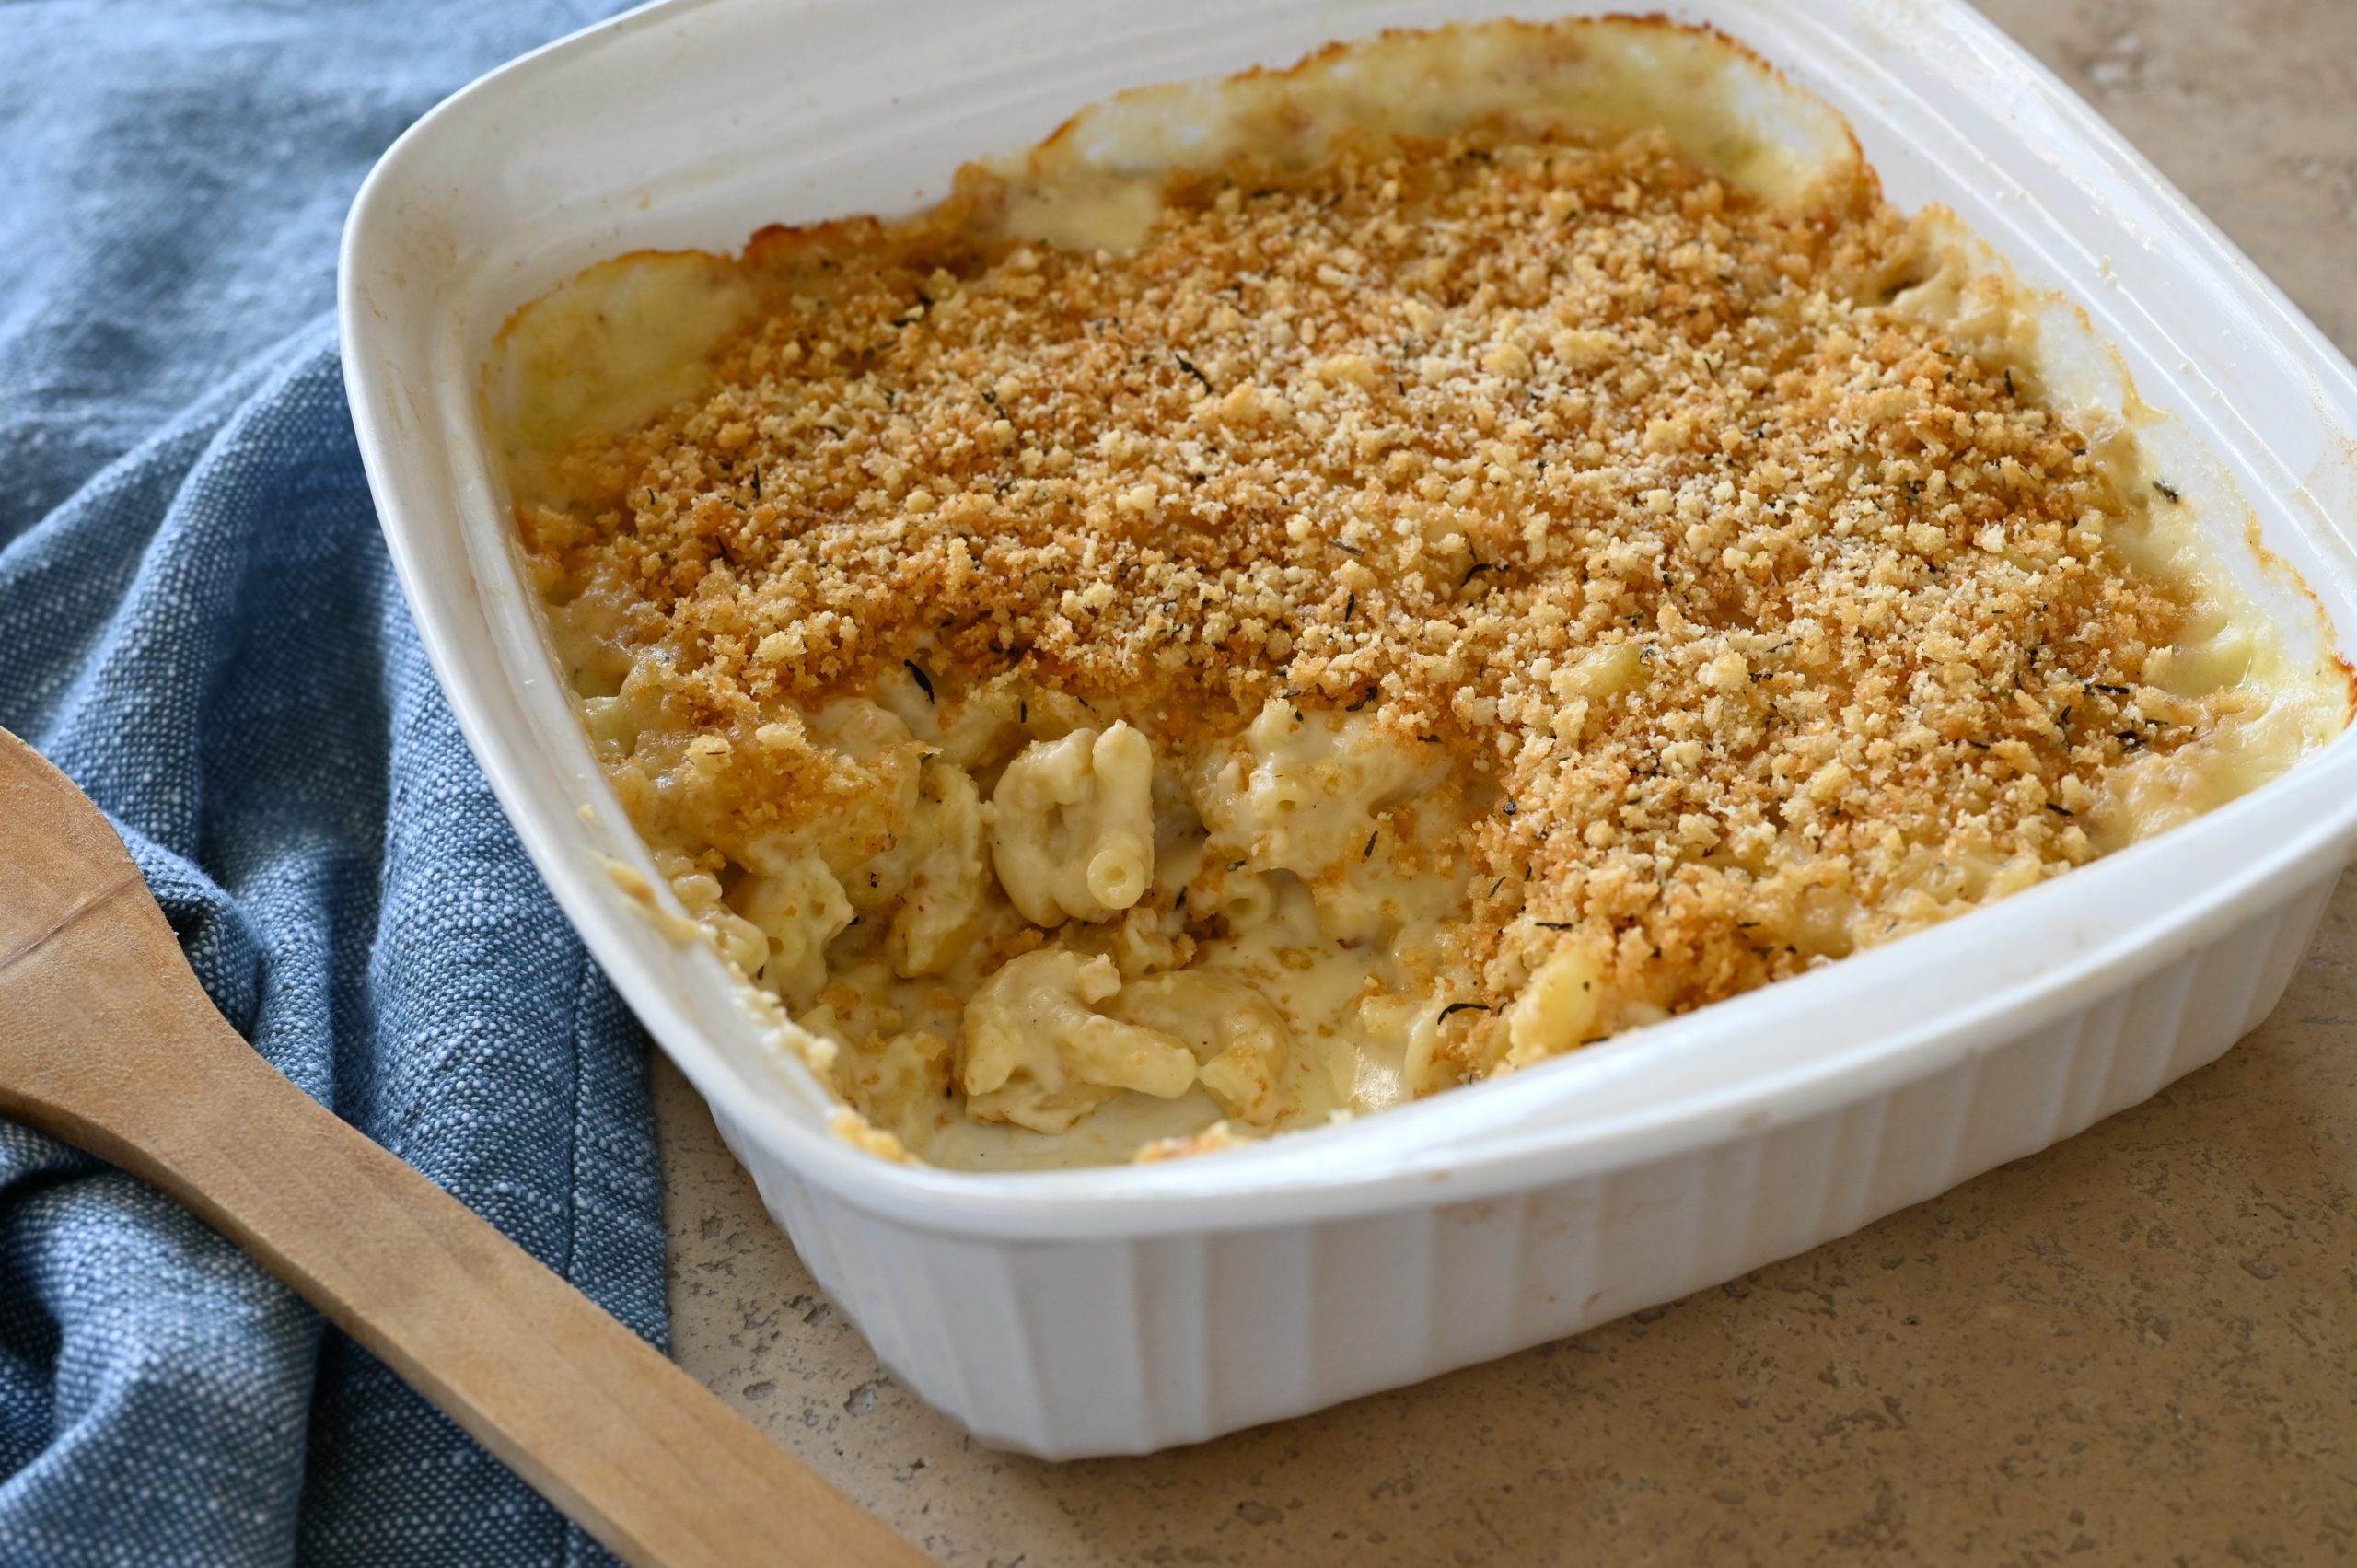 https://www.onceuponachef.com/images/2019/10/mac-and-cheese-scaled.jpg